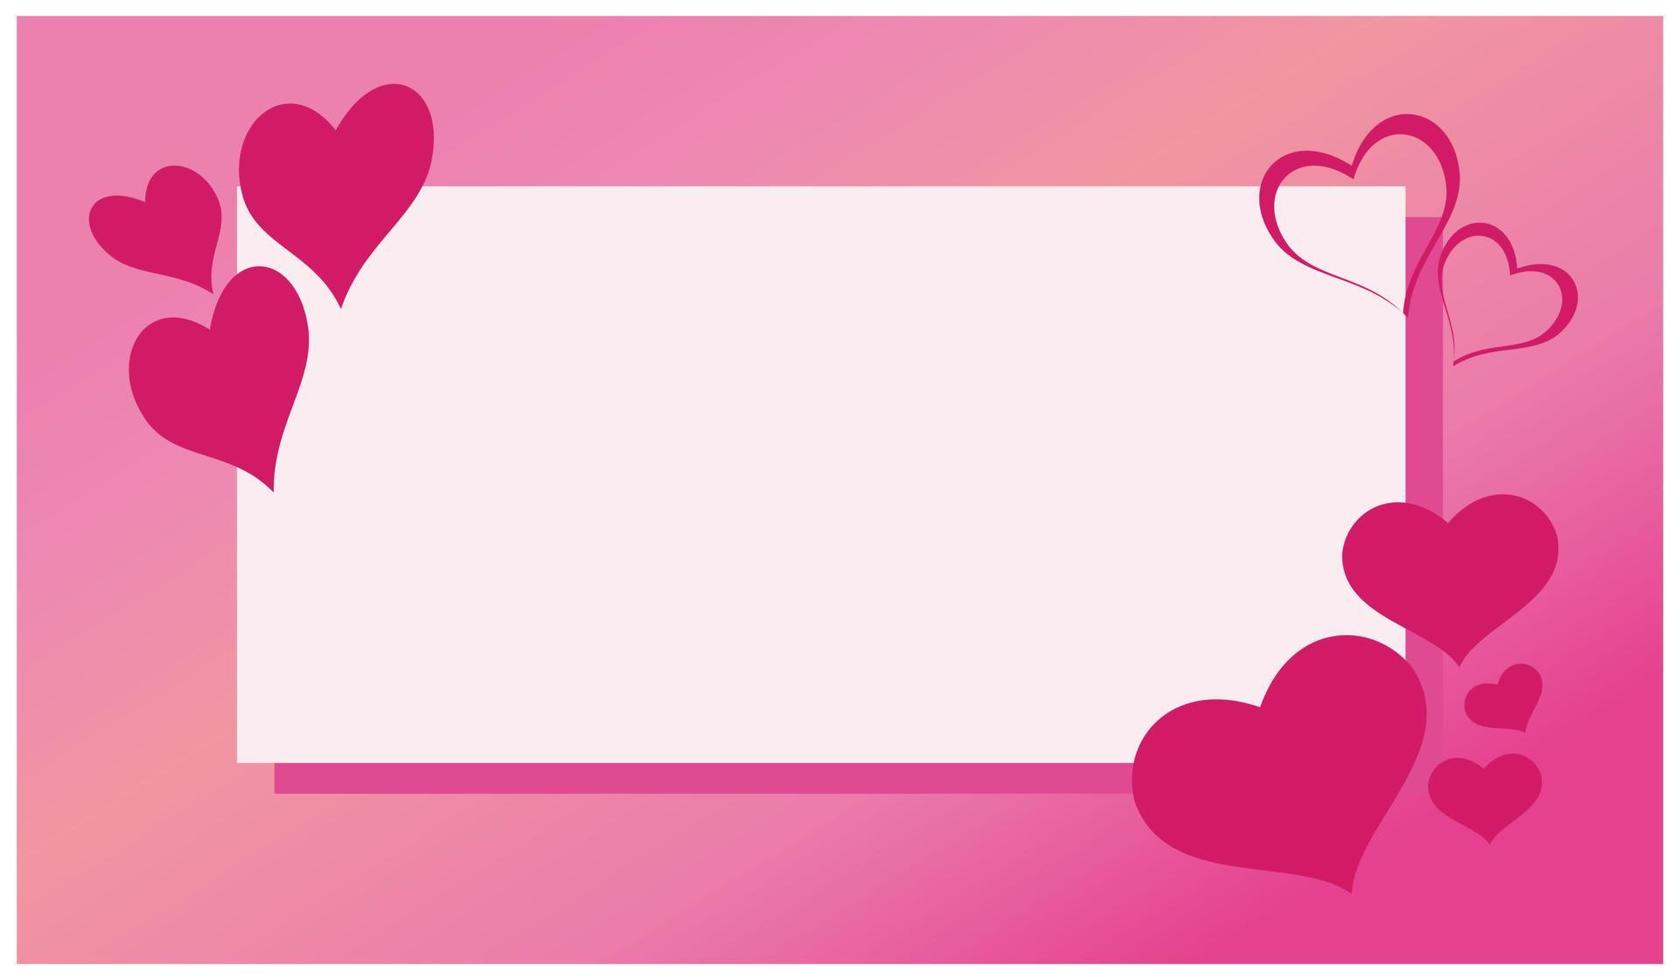 Valentine's day background with hearts and place for your text. Pink background for valentine greeting card design. Design for family and partner affection vector